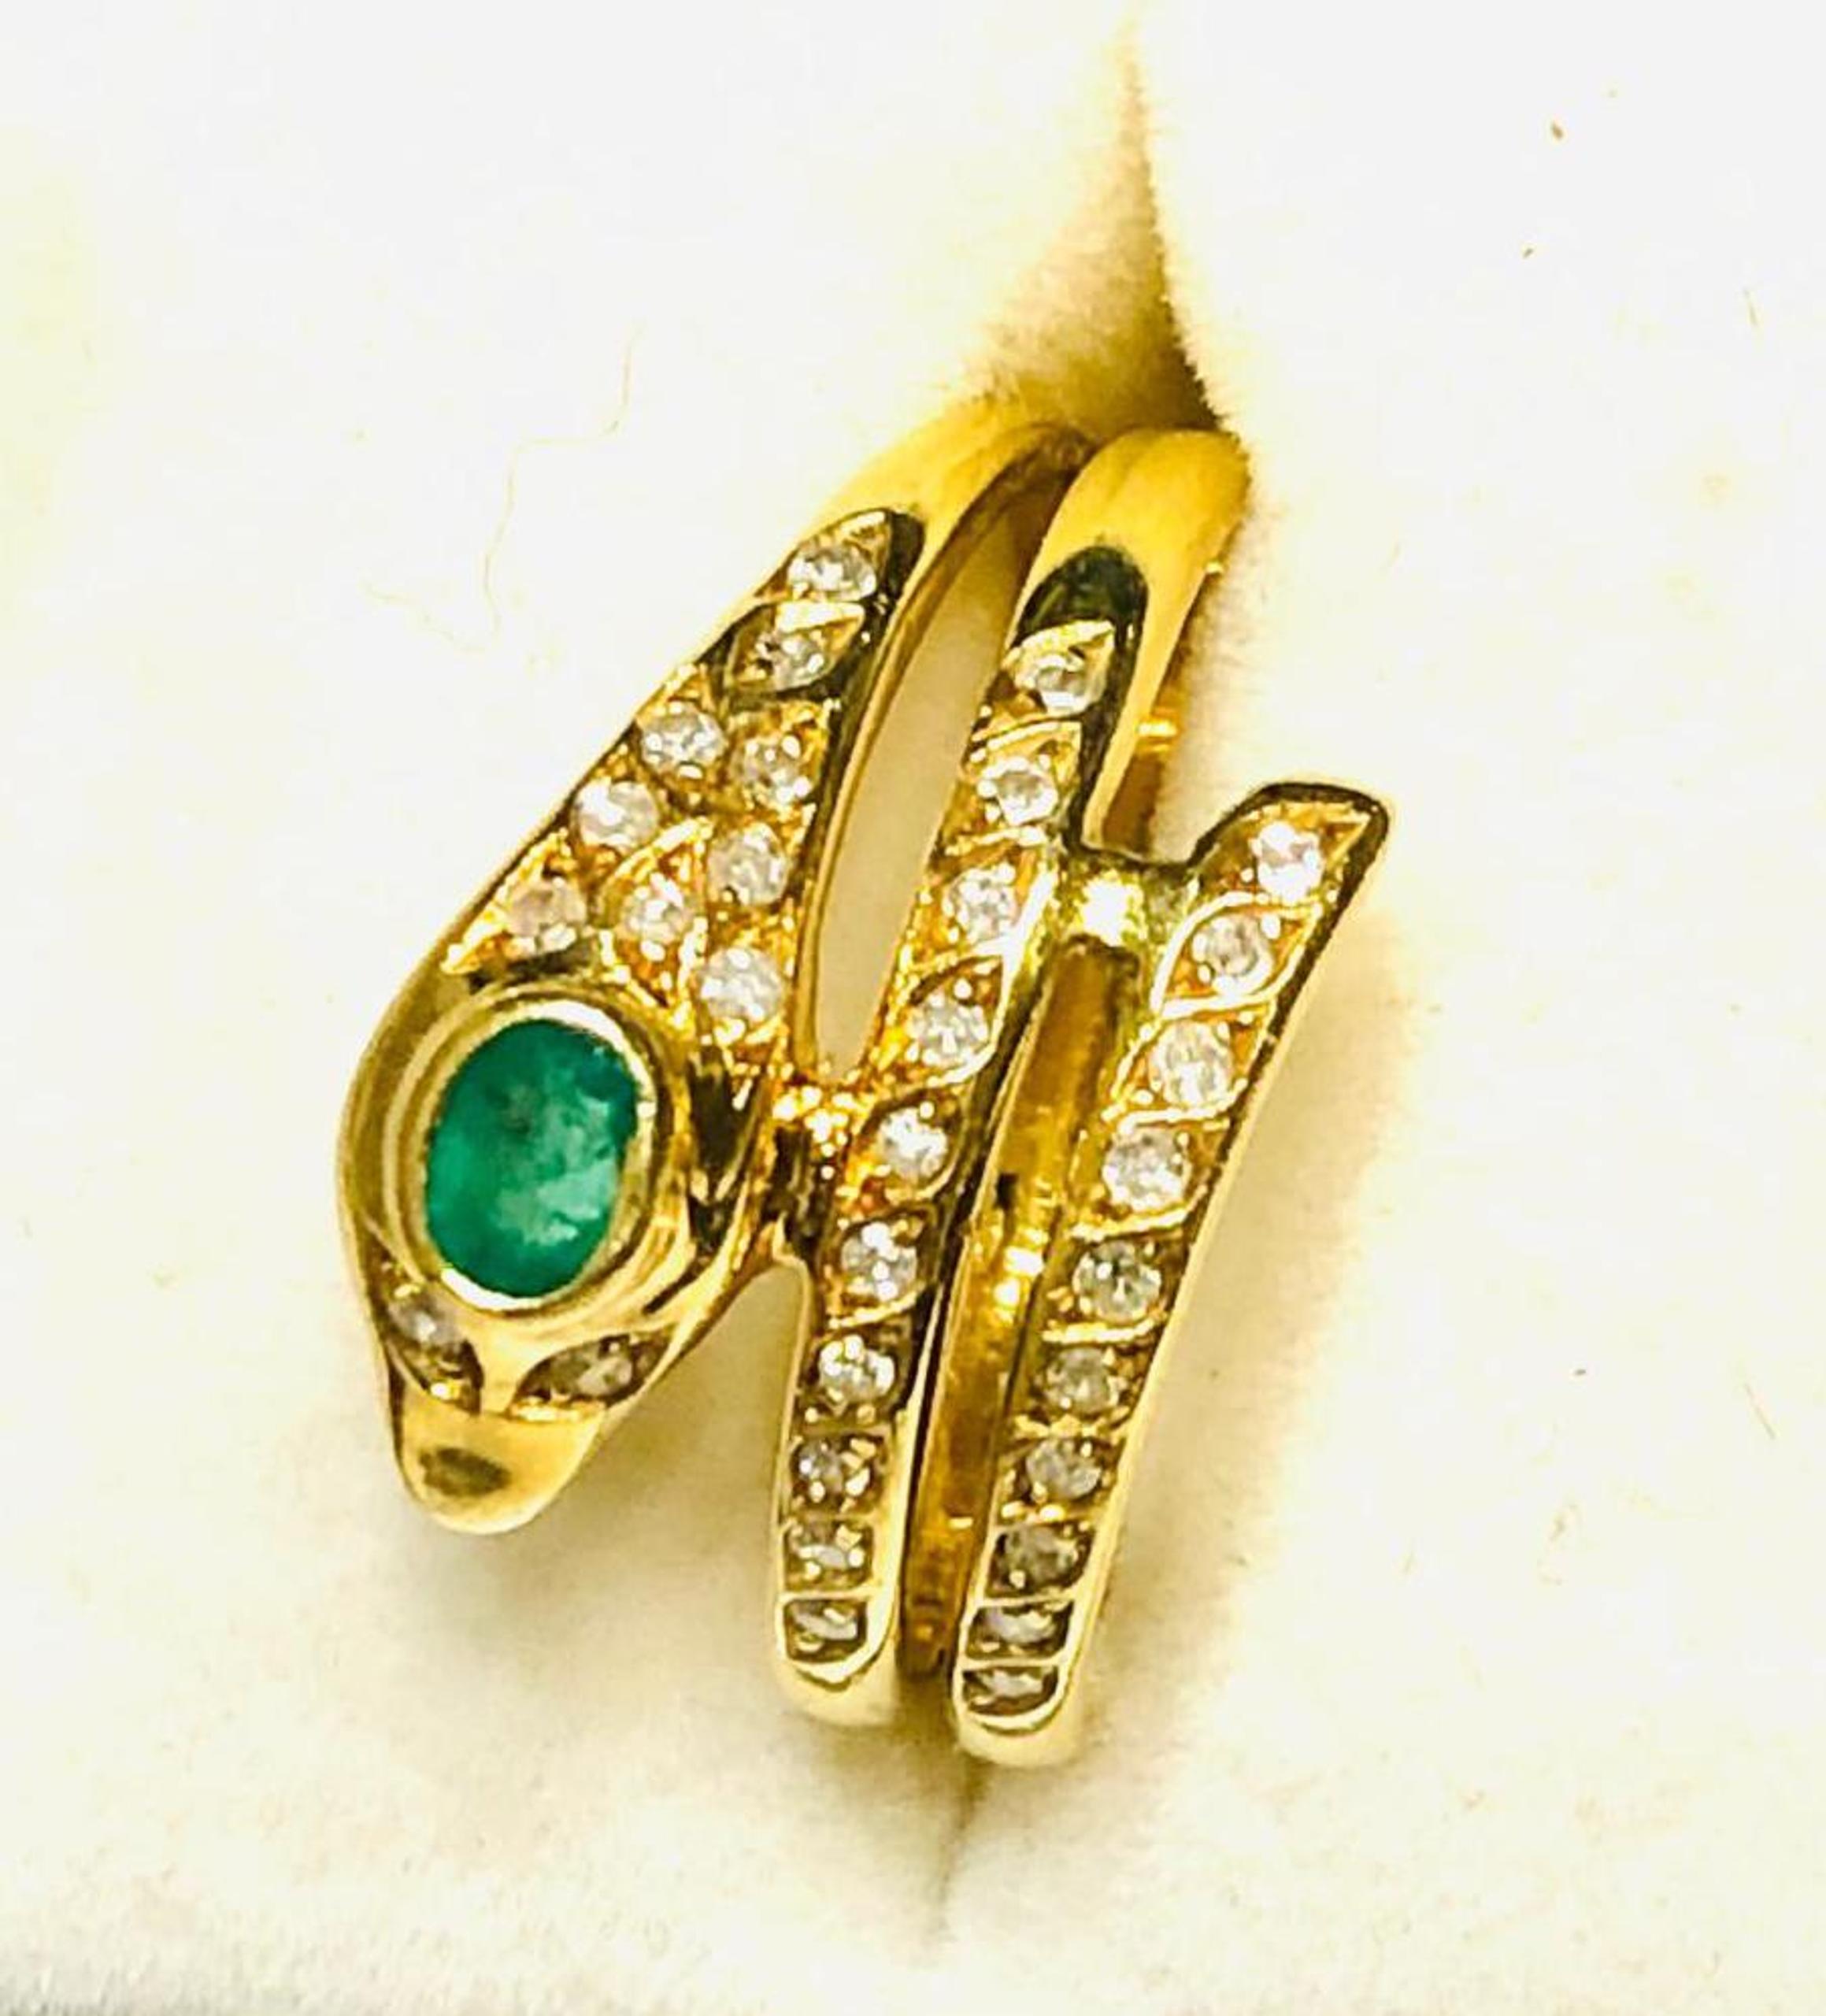 GOLD, EMERALD AND DIAMOND SNAKE RING